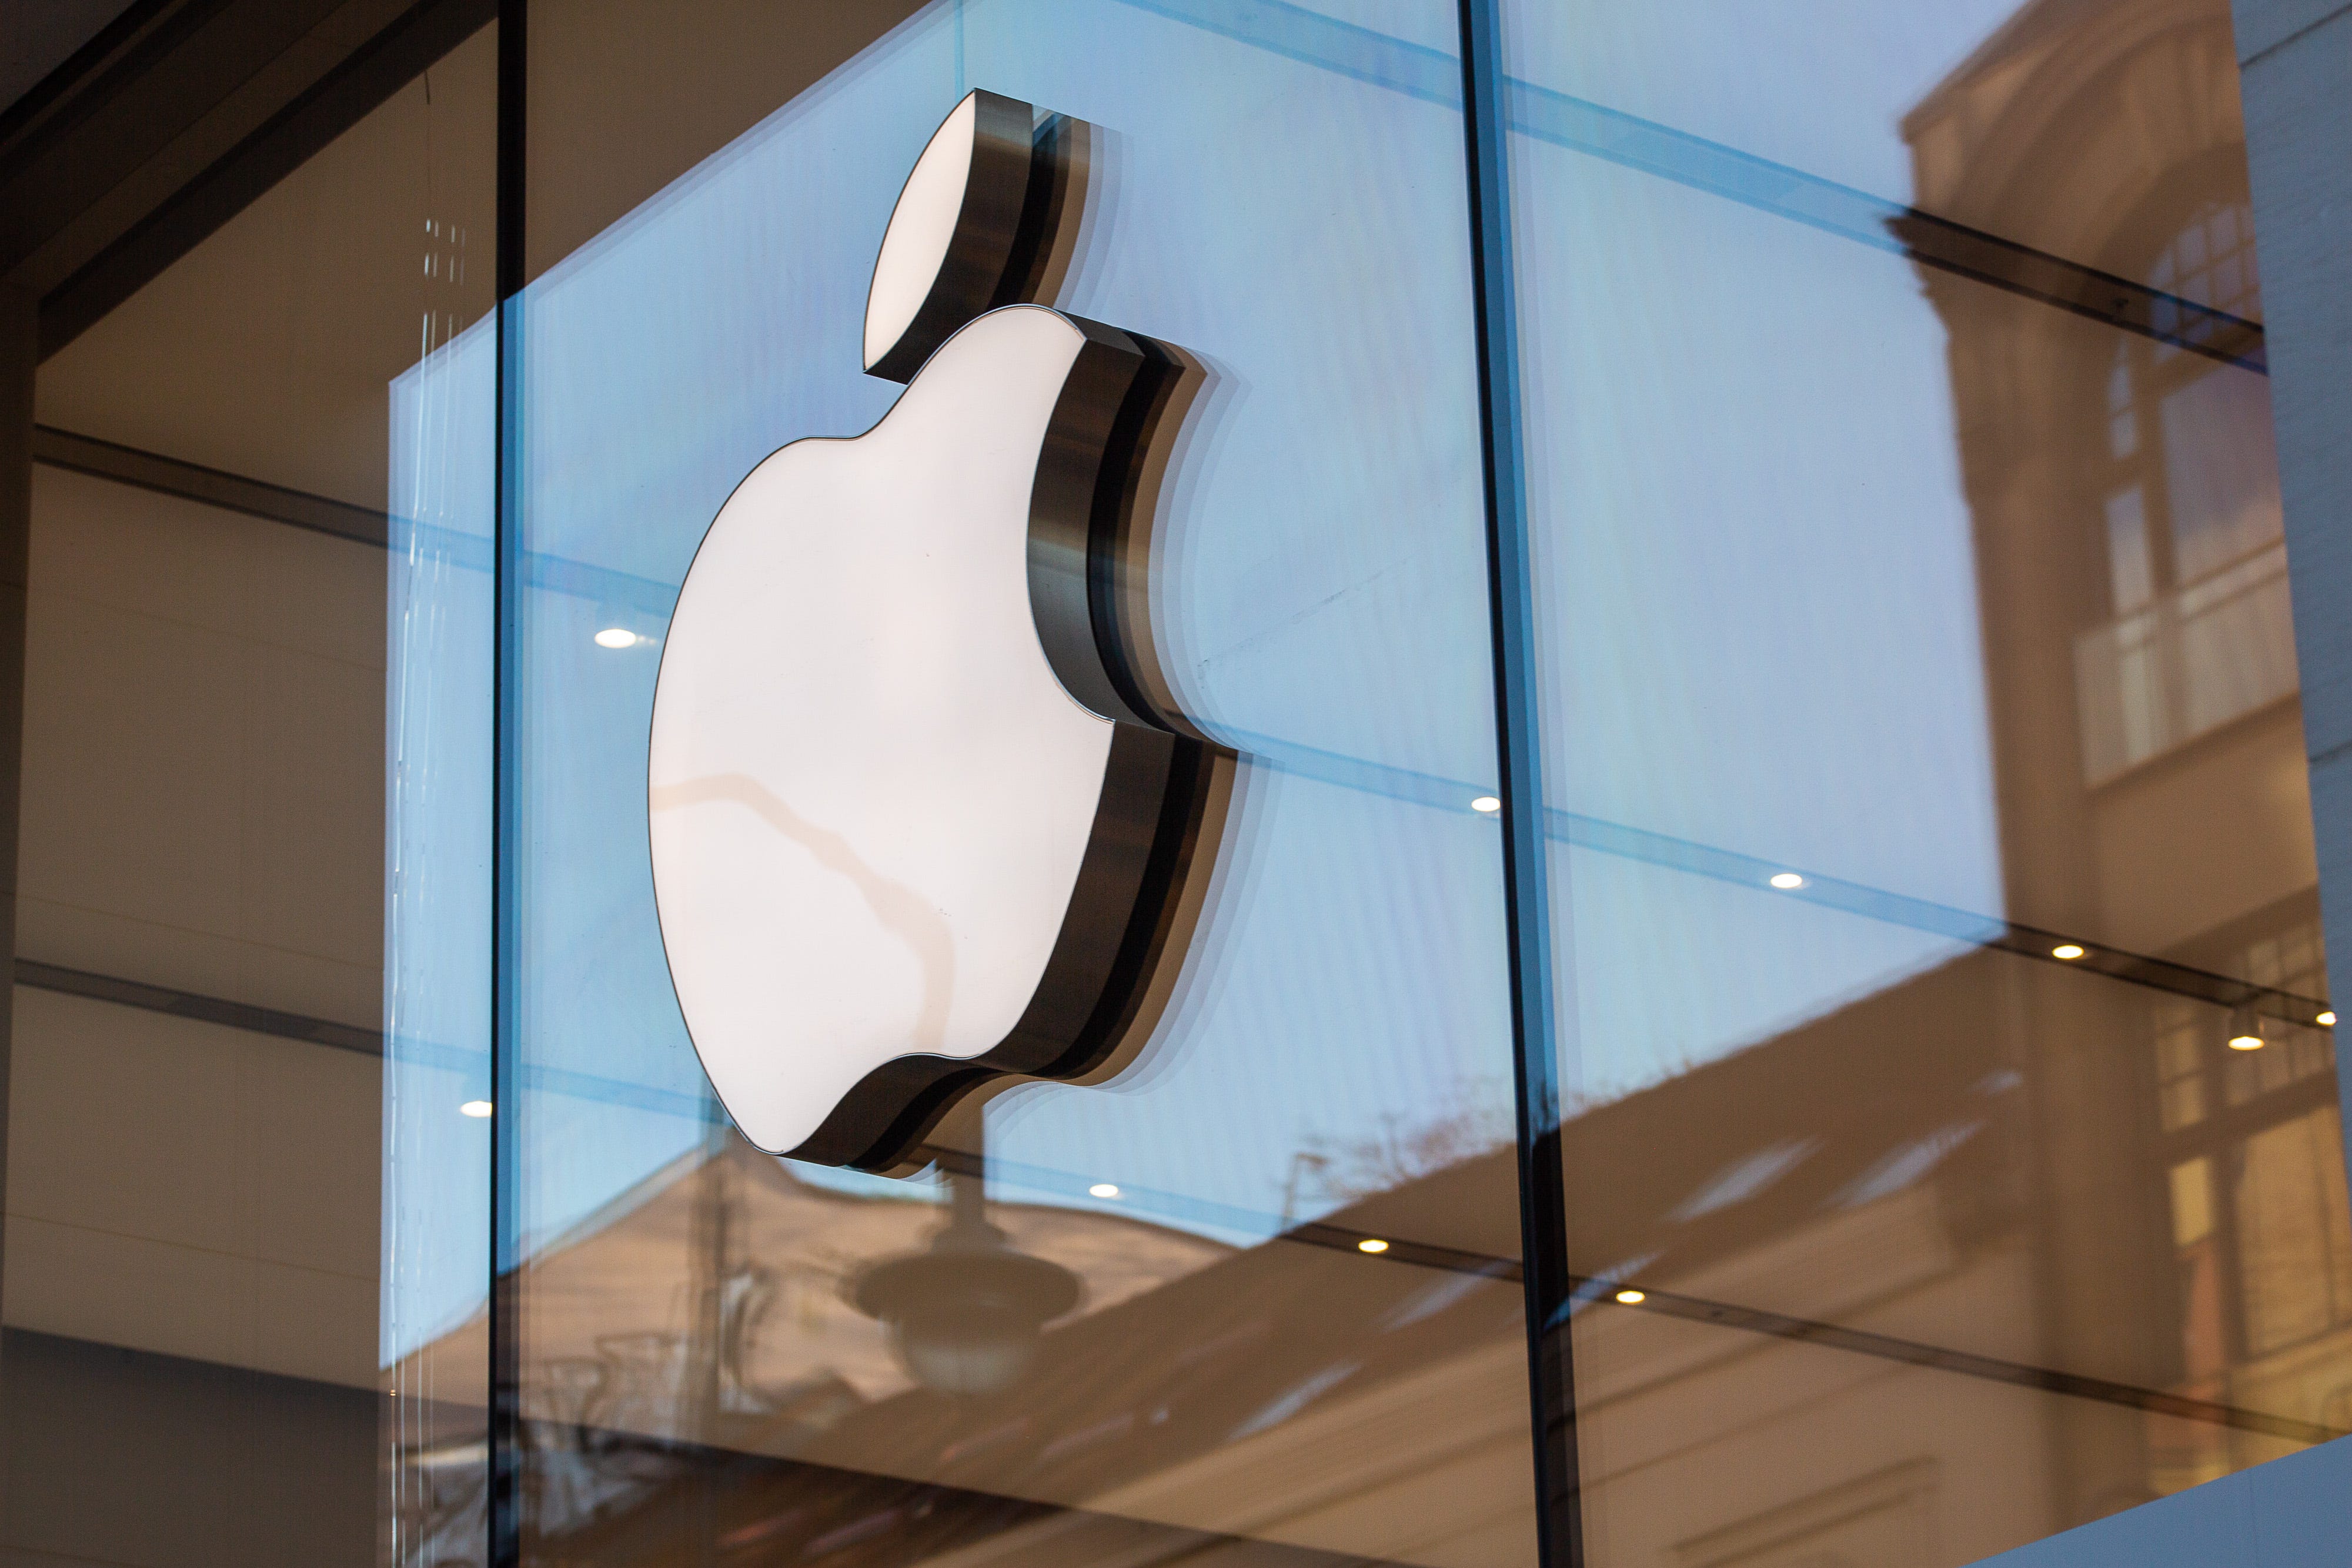 apple reportedly faces its first eu antitrust fine